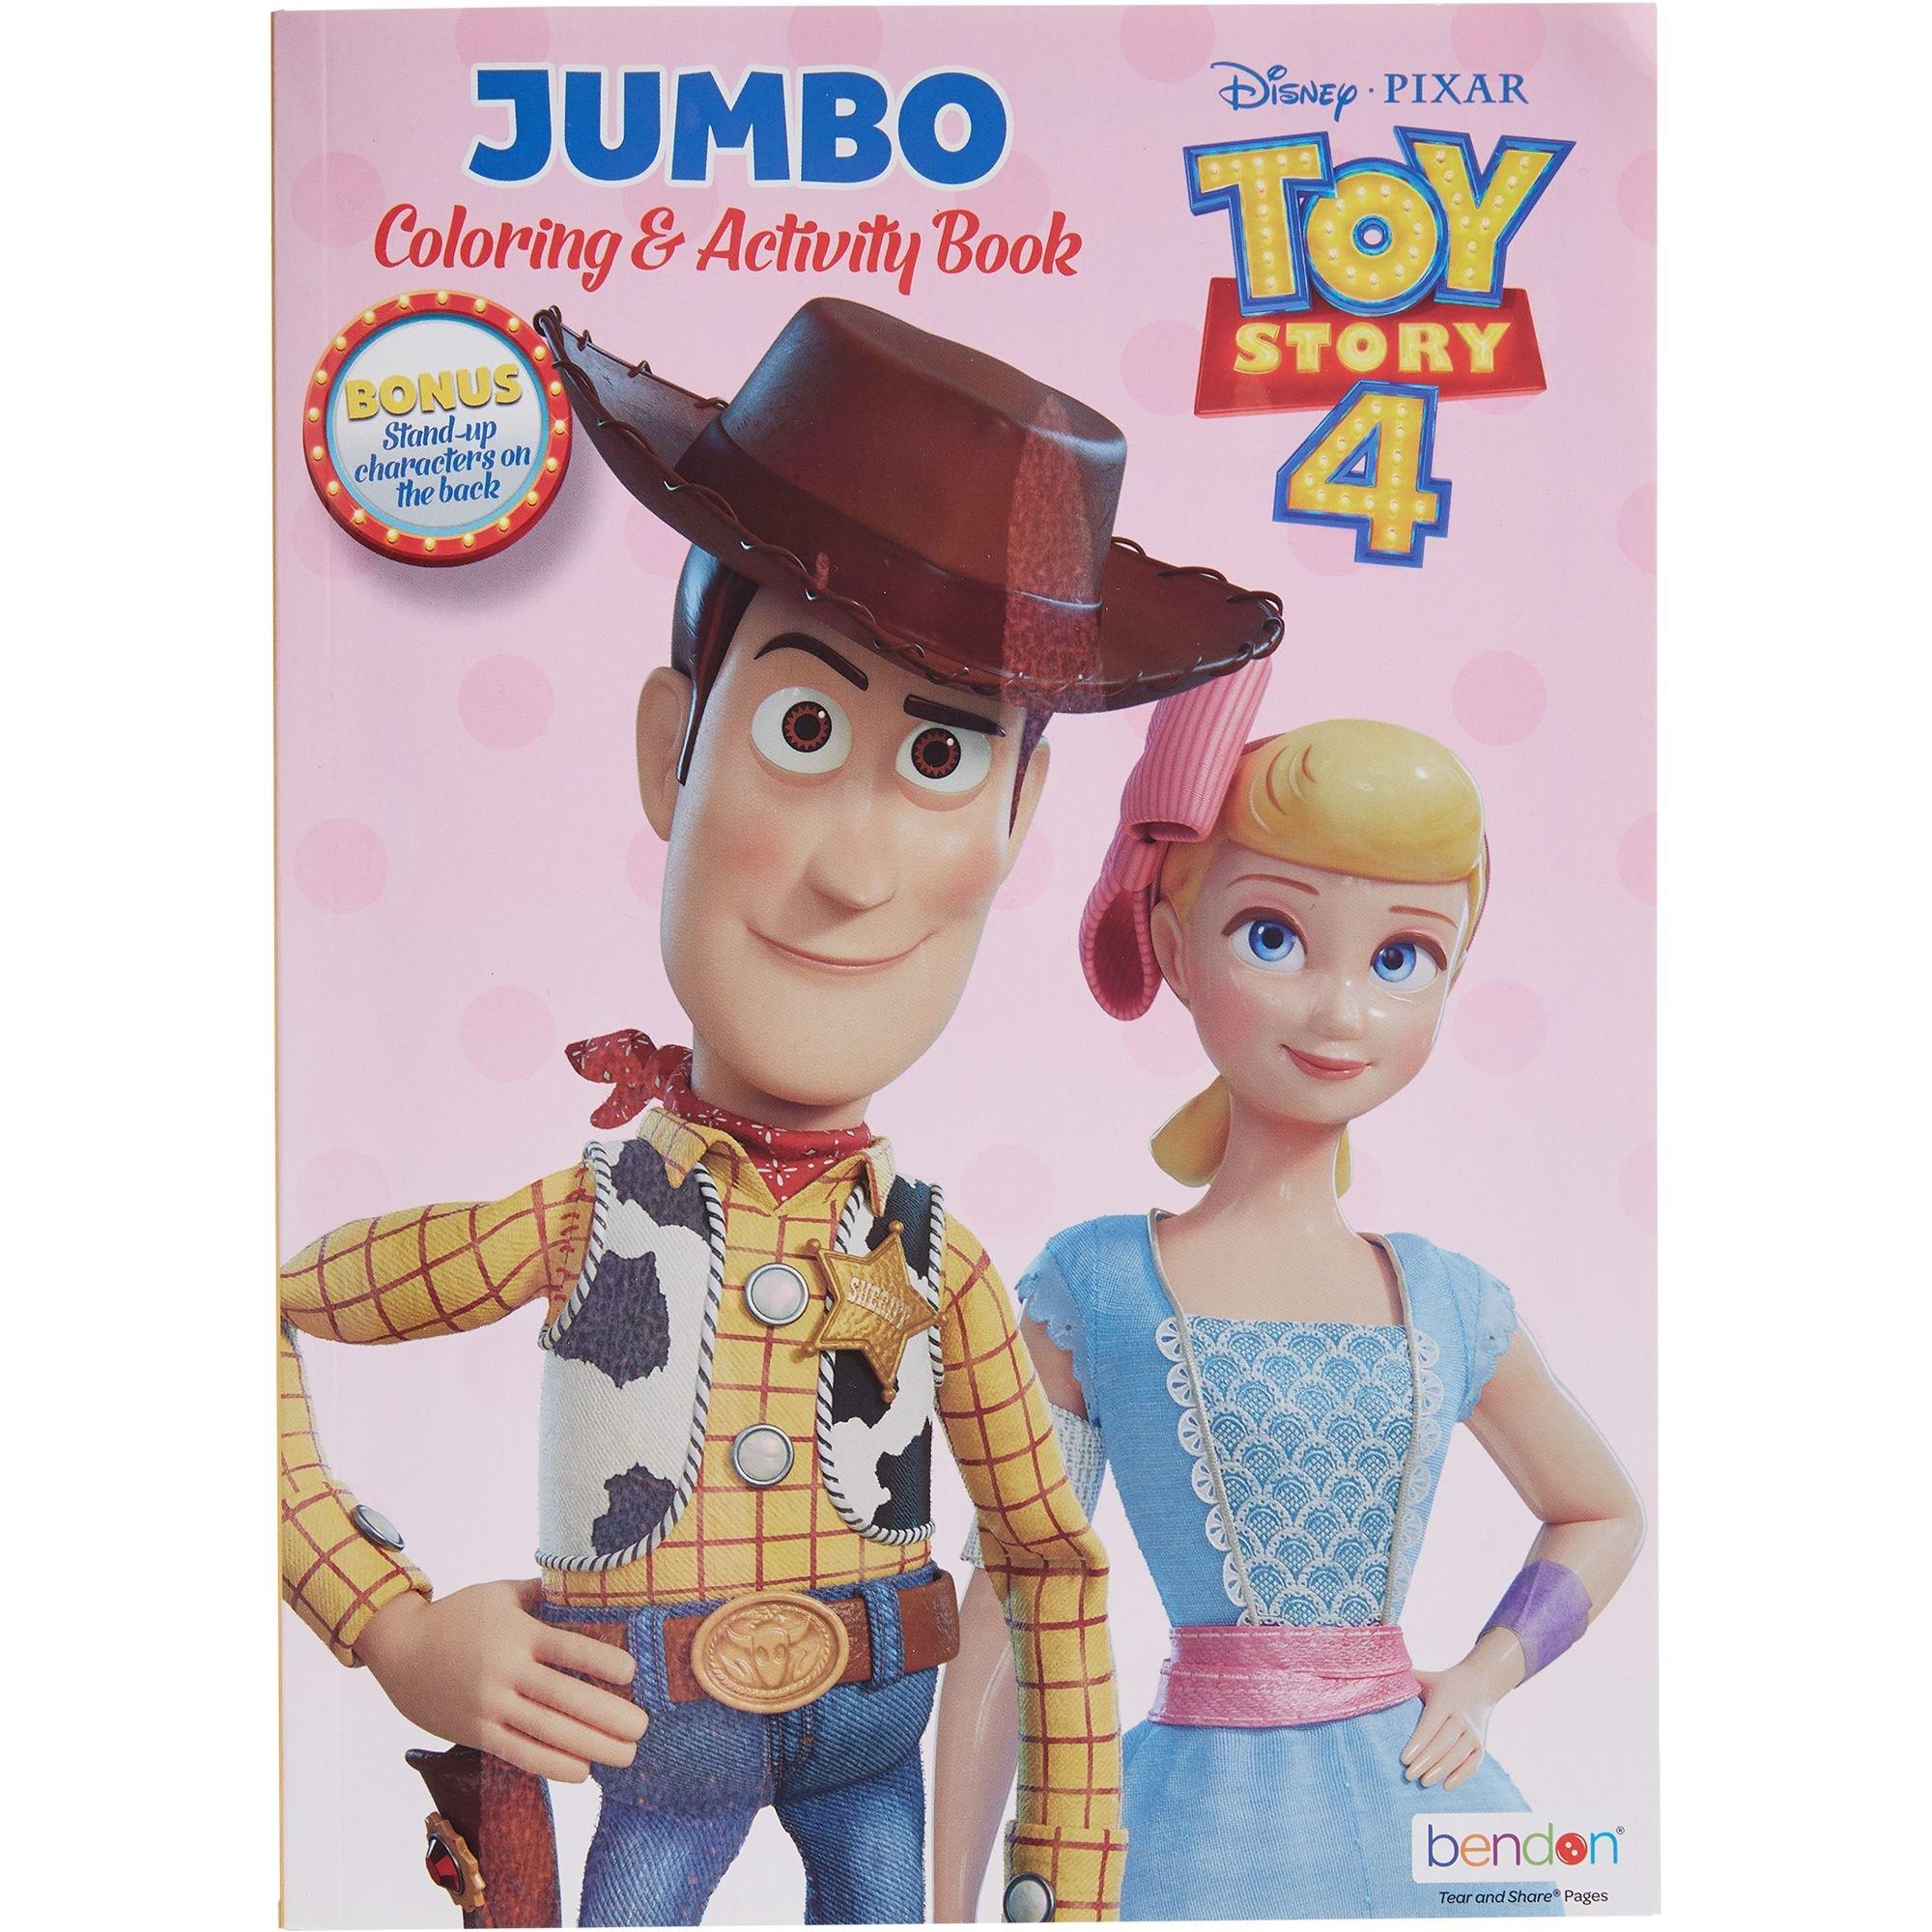 Toy Story Christmas Coloring Book: Jumbo Coloring Books With Over 30 High  Quality Images Based On Toy Story Cartoons by Toy Coloring Book